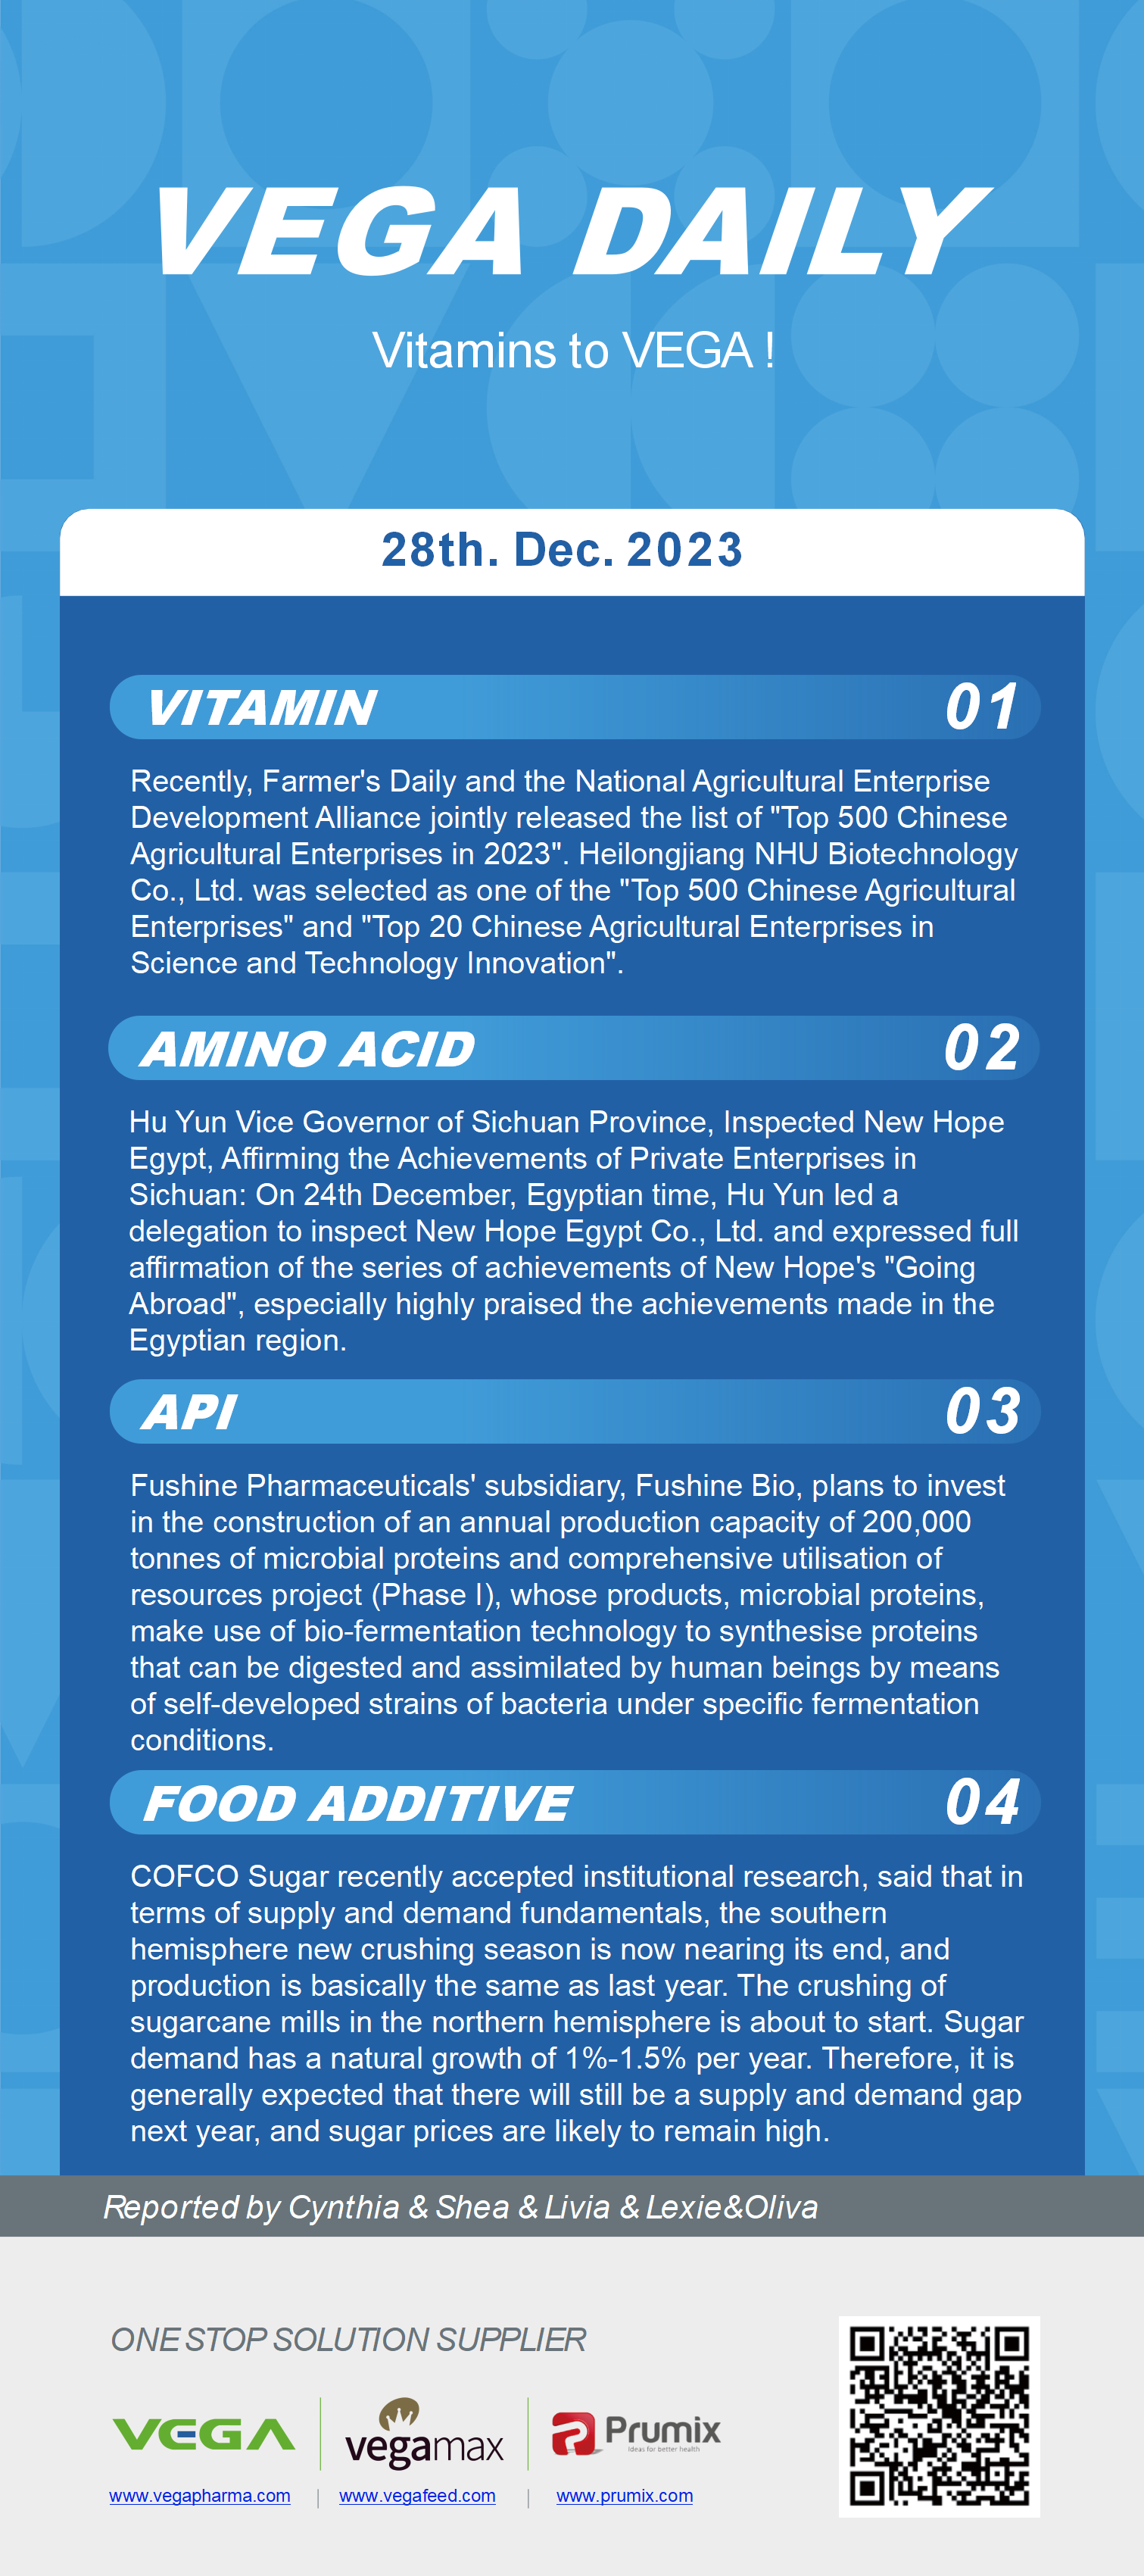 Vega Daily Dated on Dec 28th 2023 Vitamin Amino Acid APl Food Additives.png